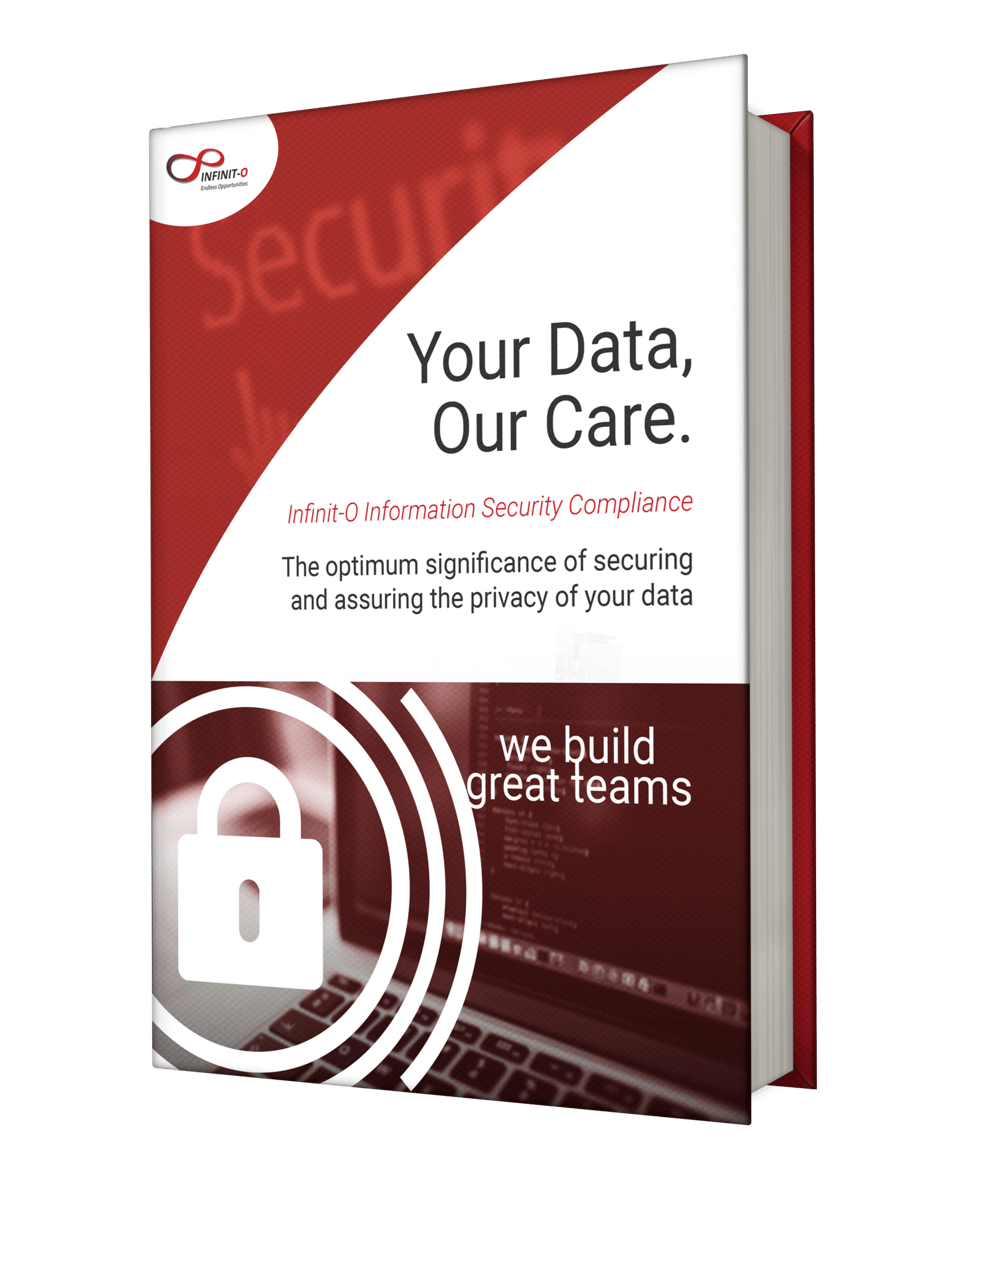 Infinit-O Information Security Compliance